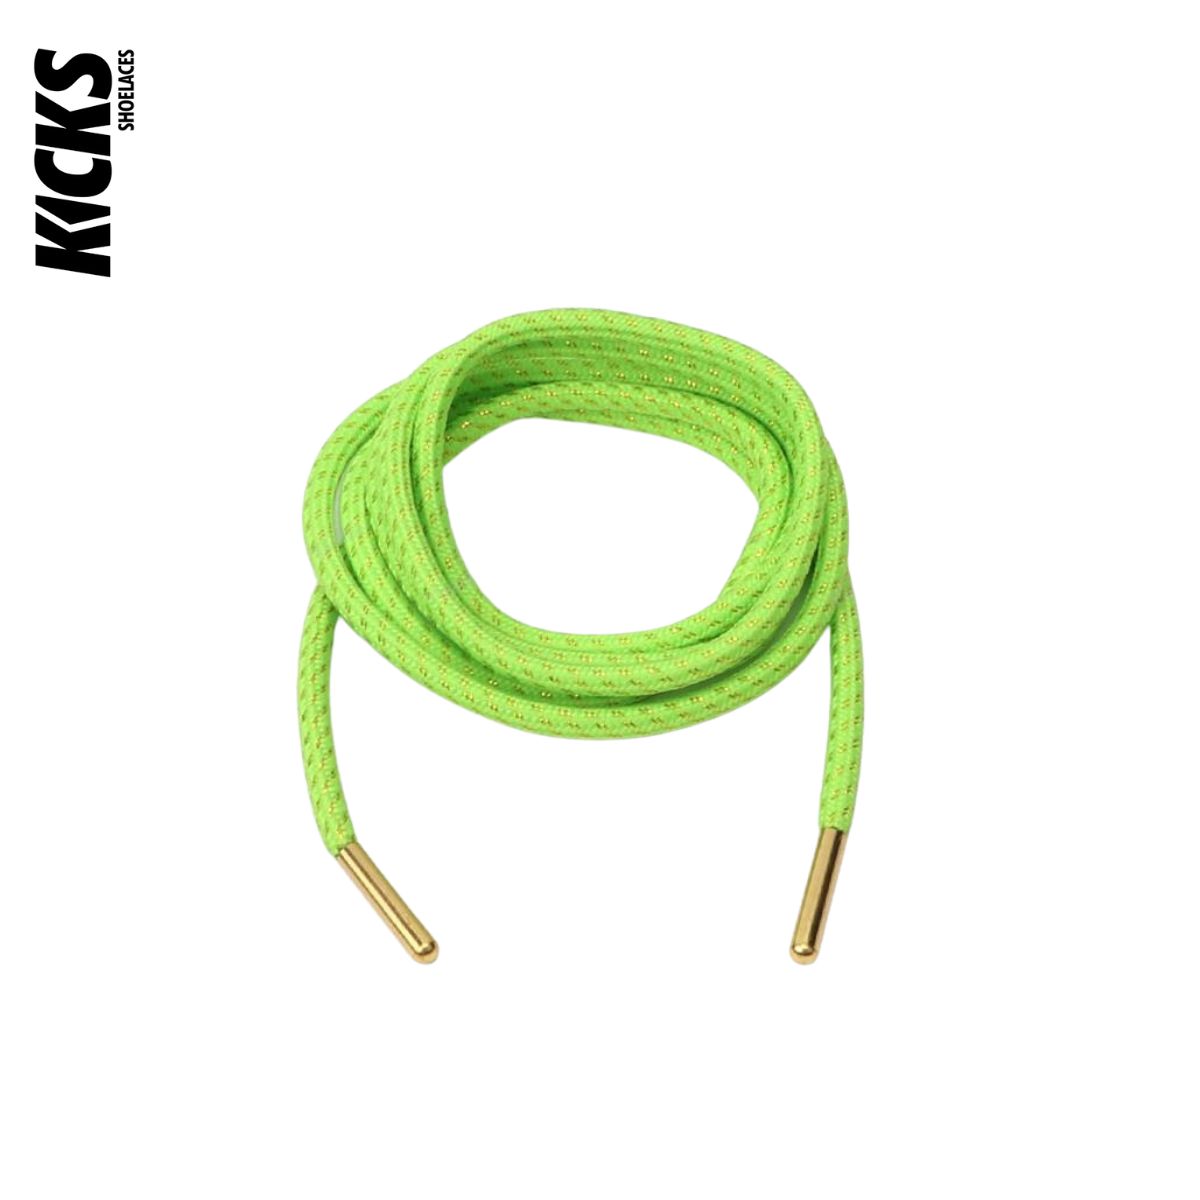 Round Shoelaces with Metal Aglets - Kicks Shoelaces